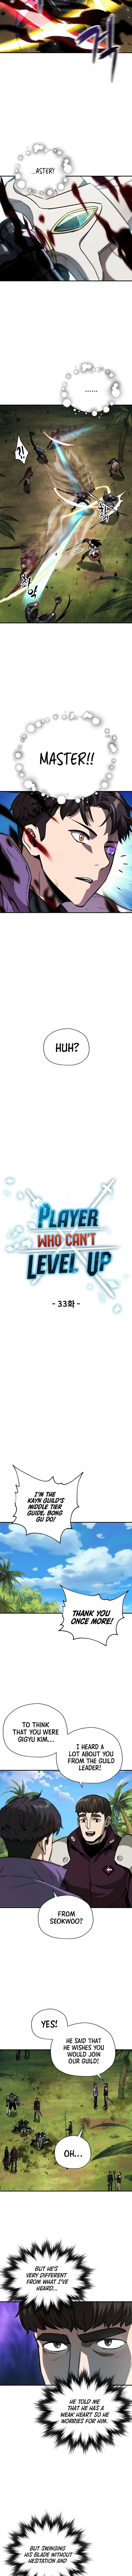 player-who-cant-level-up-chap-33-3